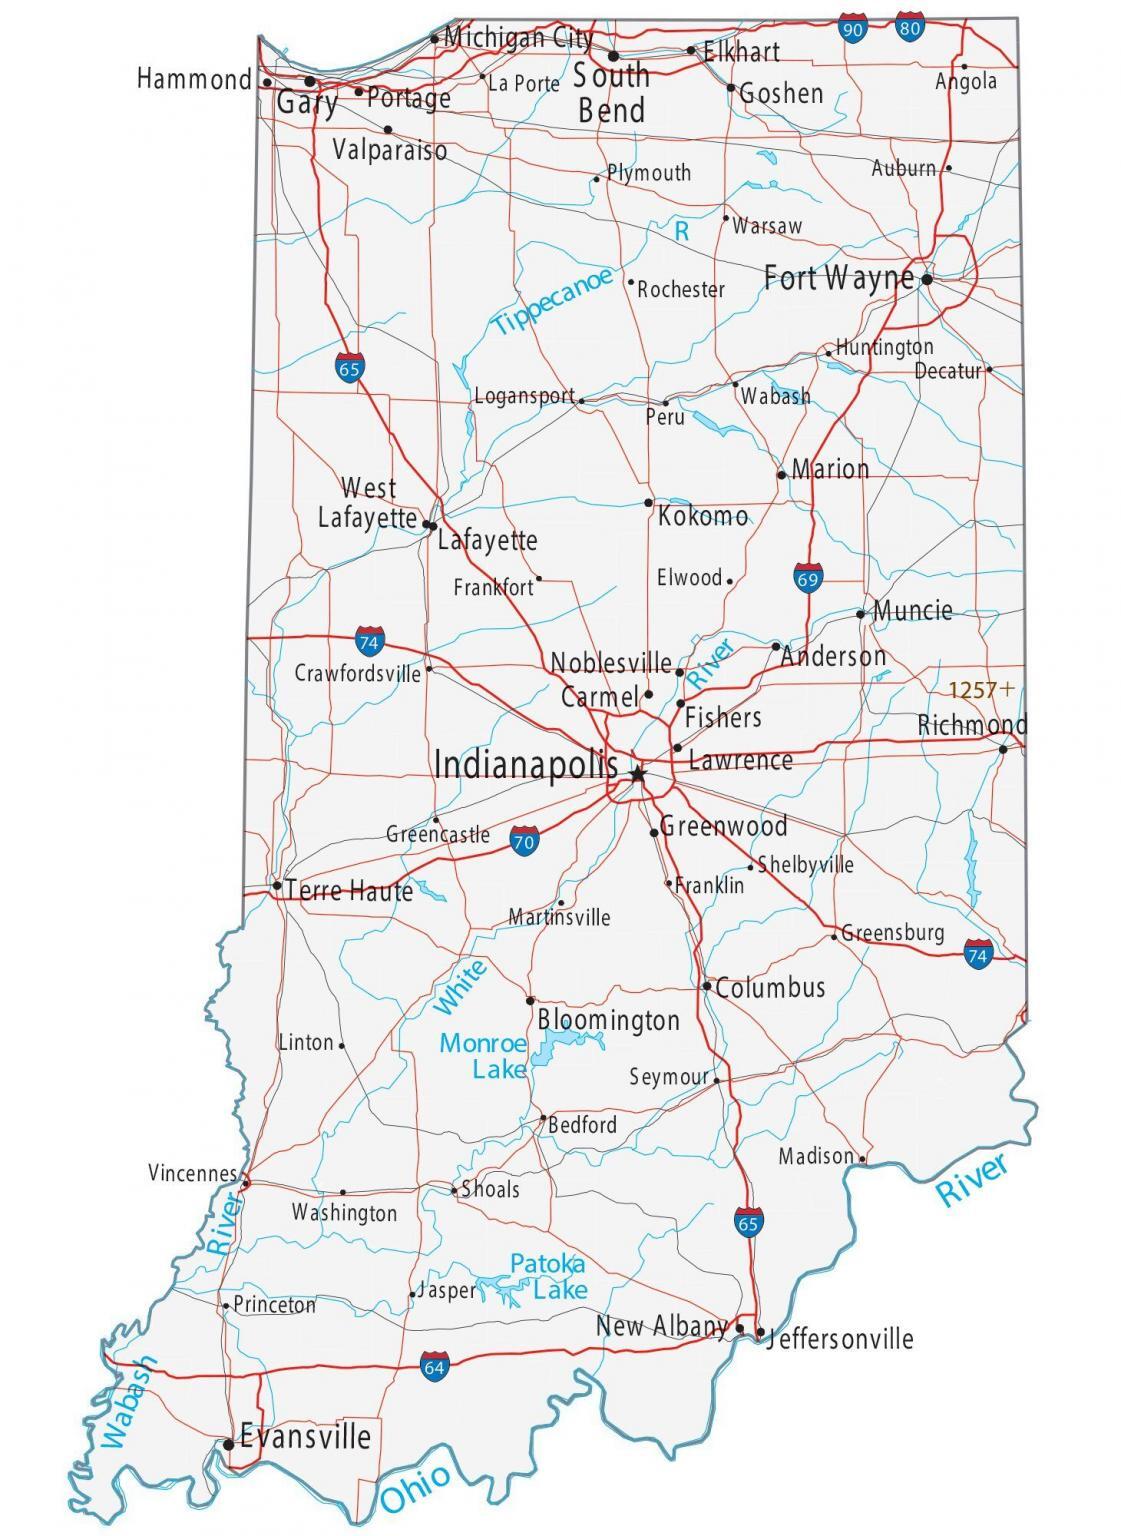 indiana-county-map-gis-geography